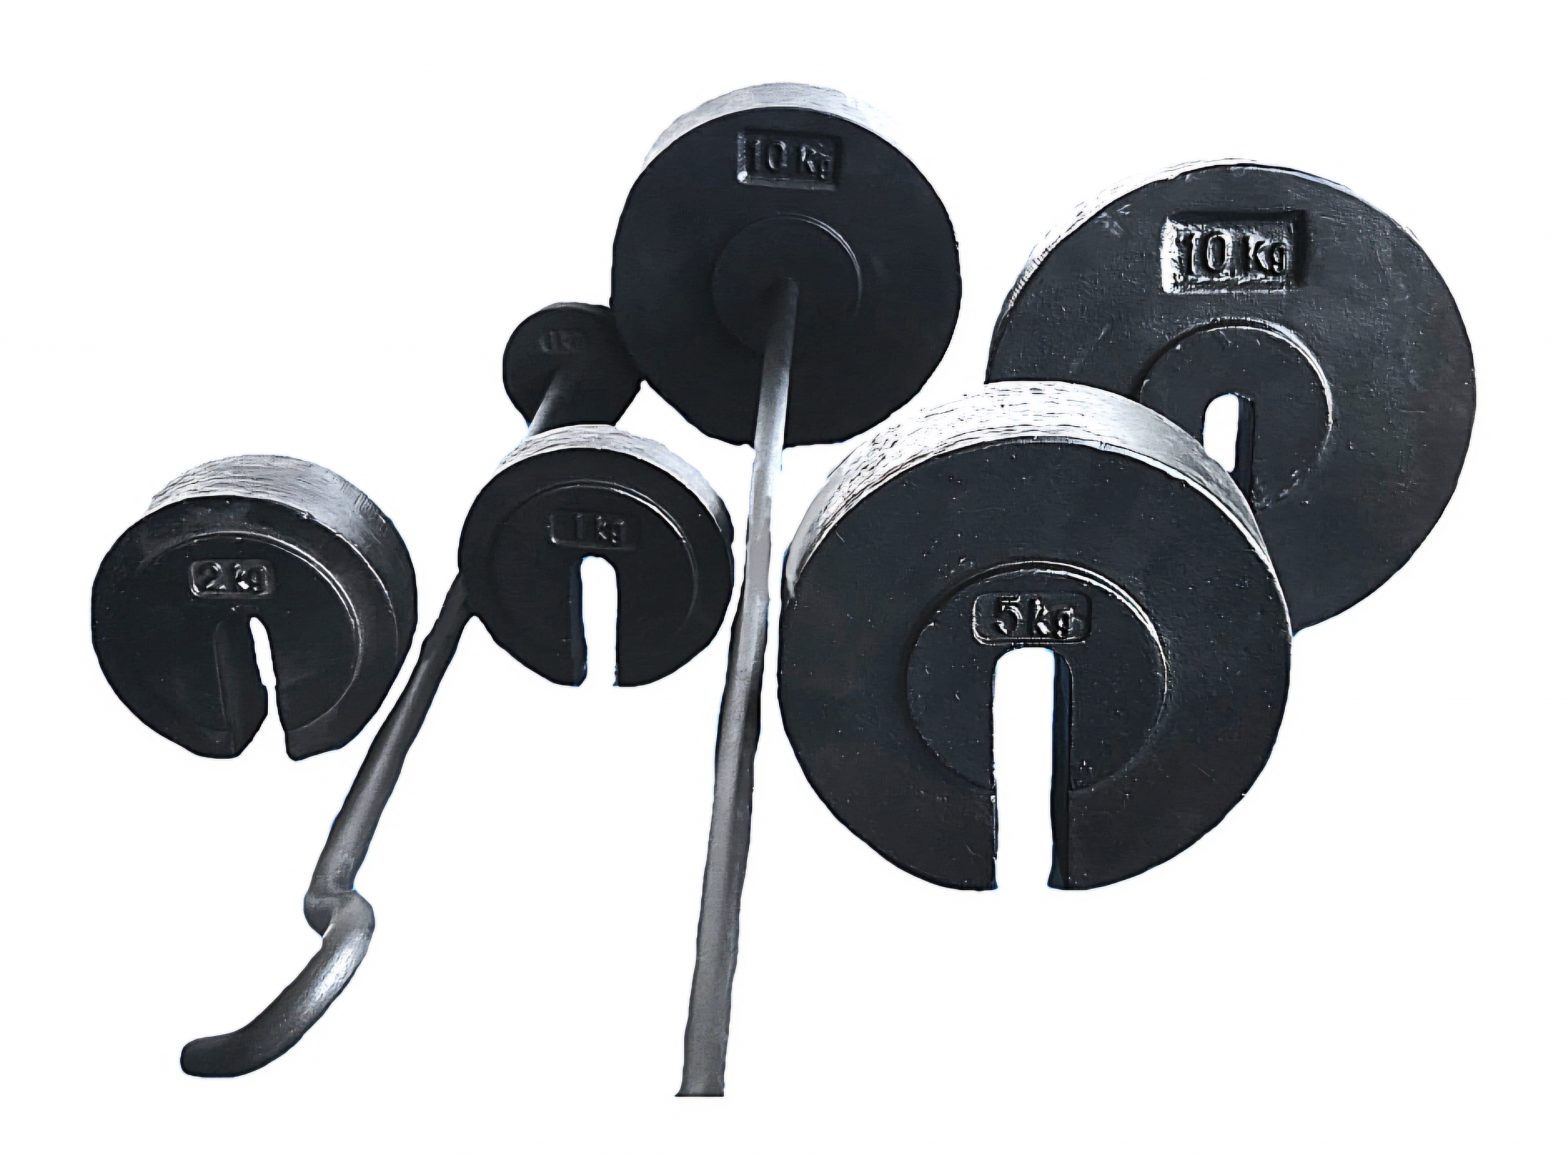 M1 Iron Slotted Hanger Calibration / Testing Weights